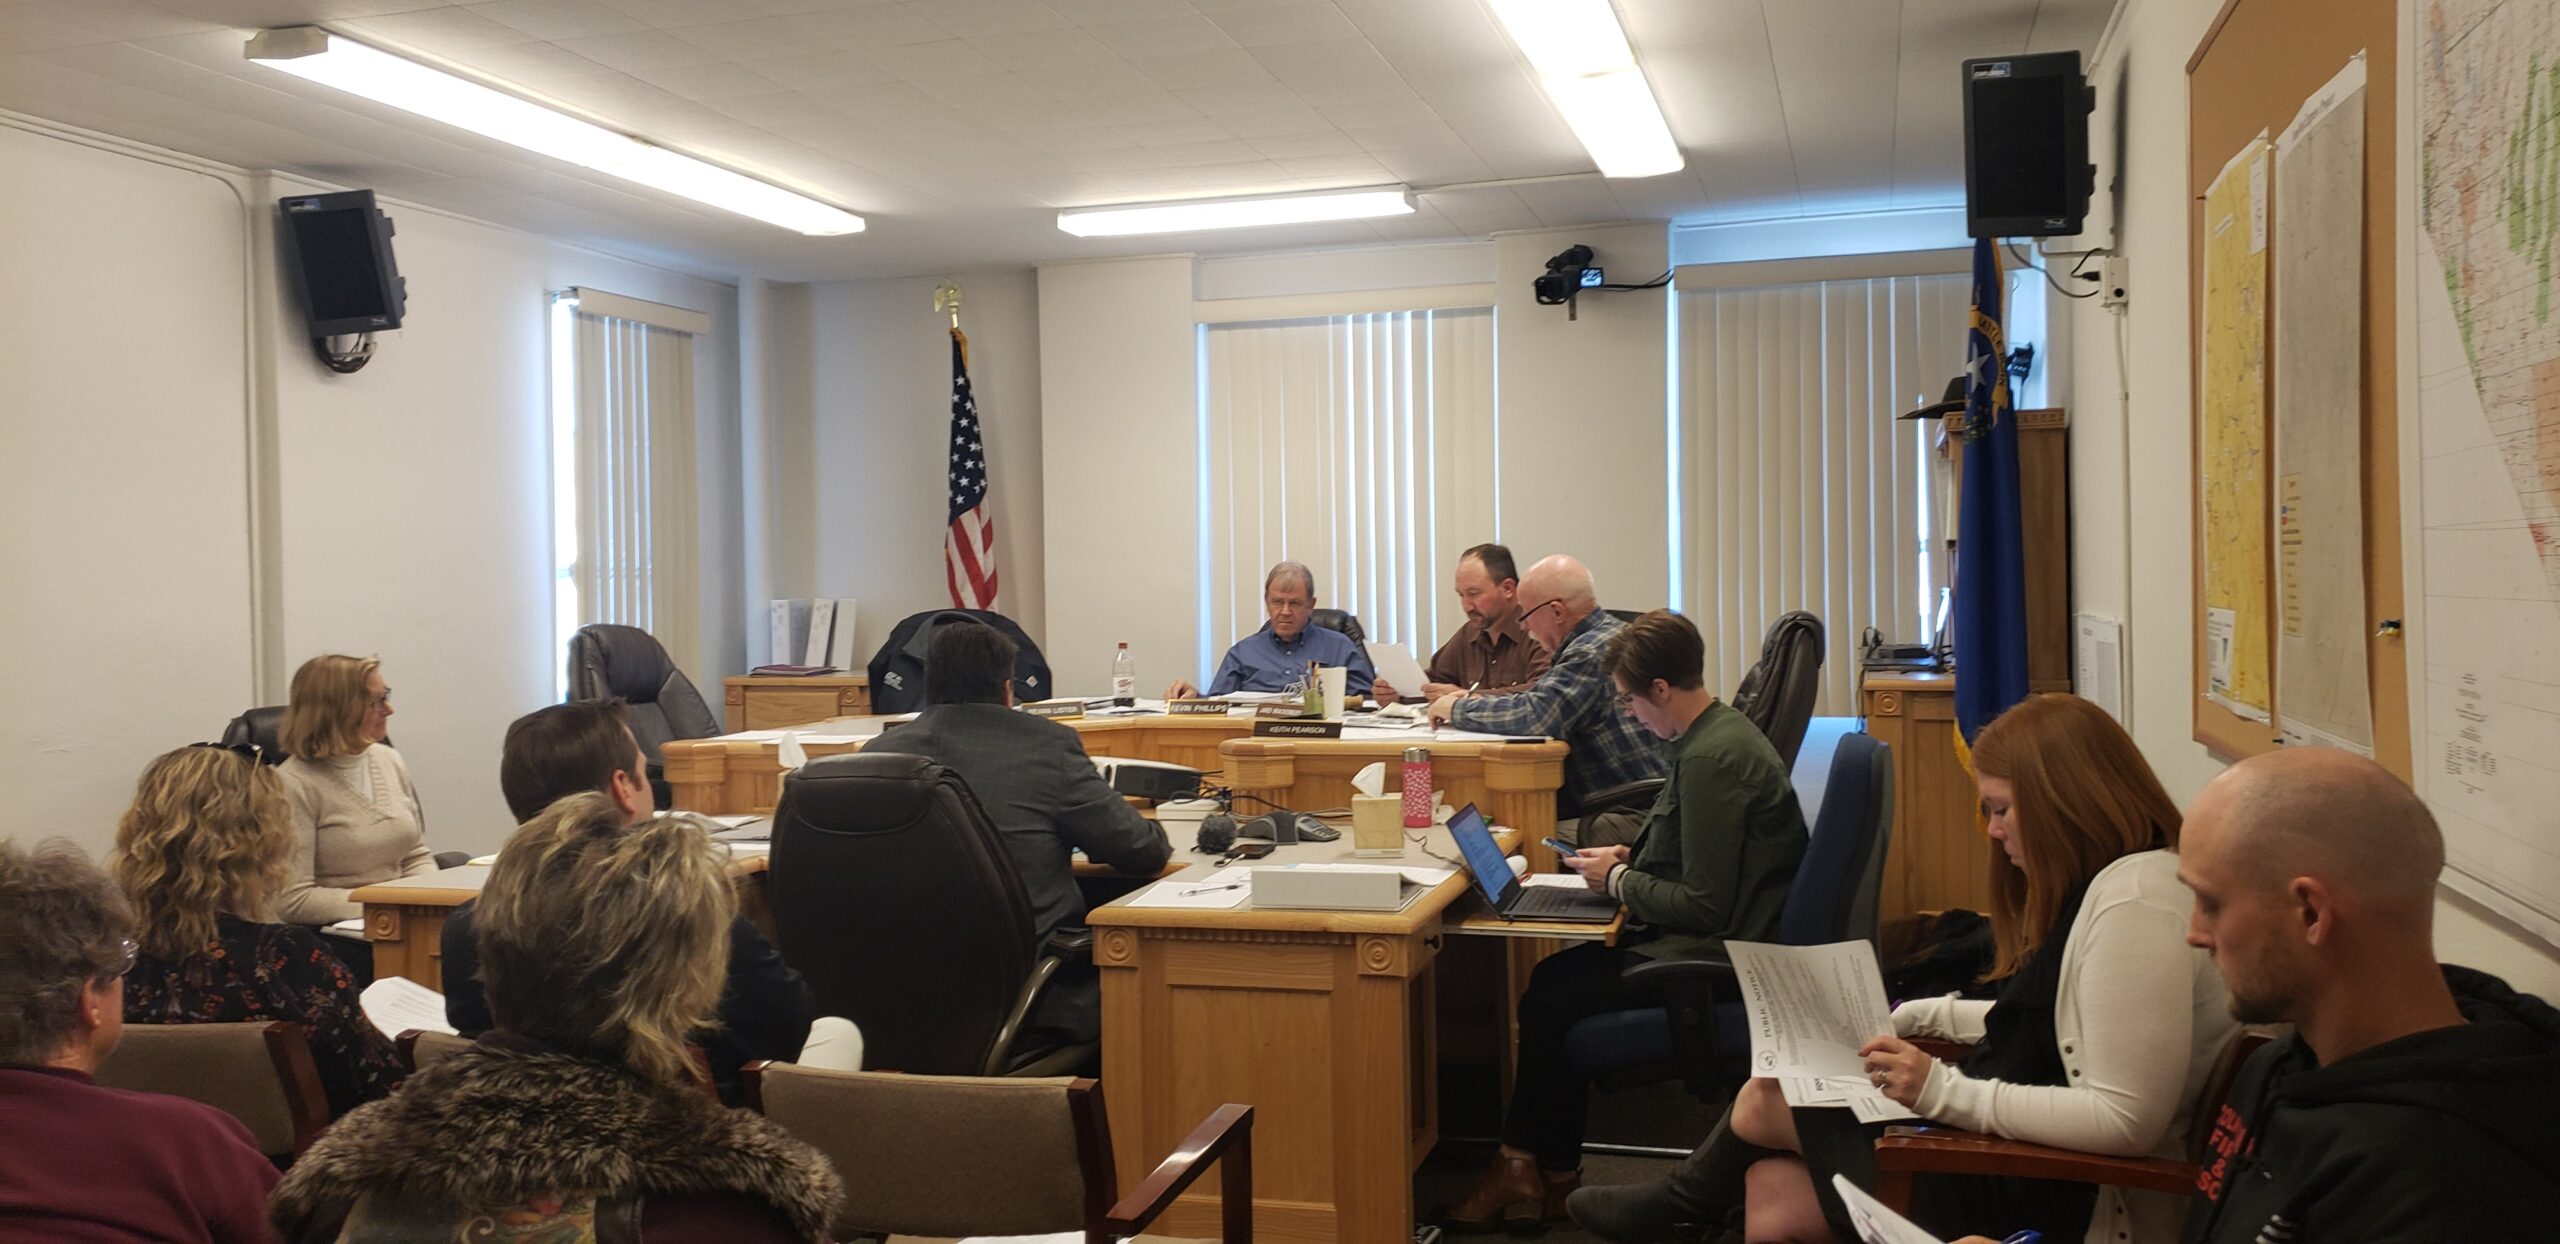 A Board of County Commissioners meeting with the board listening to a speaker taking place in a rural Nevada office.